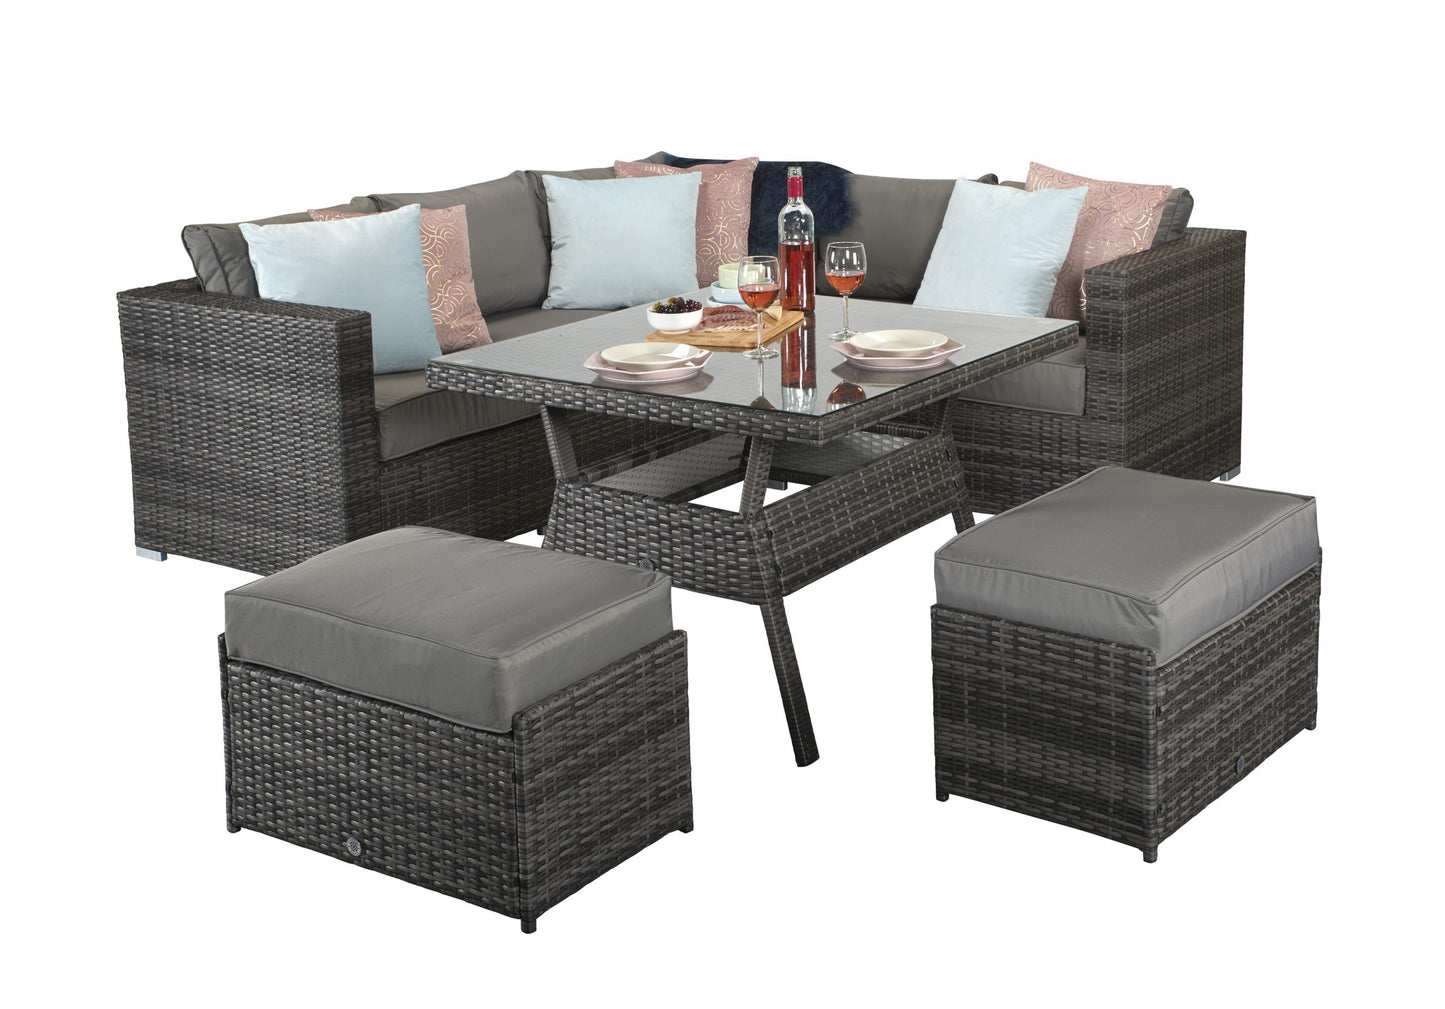 Georgia Rattan Corner Dining Set with Benches in Grey | Geor0150